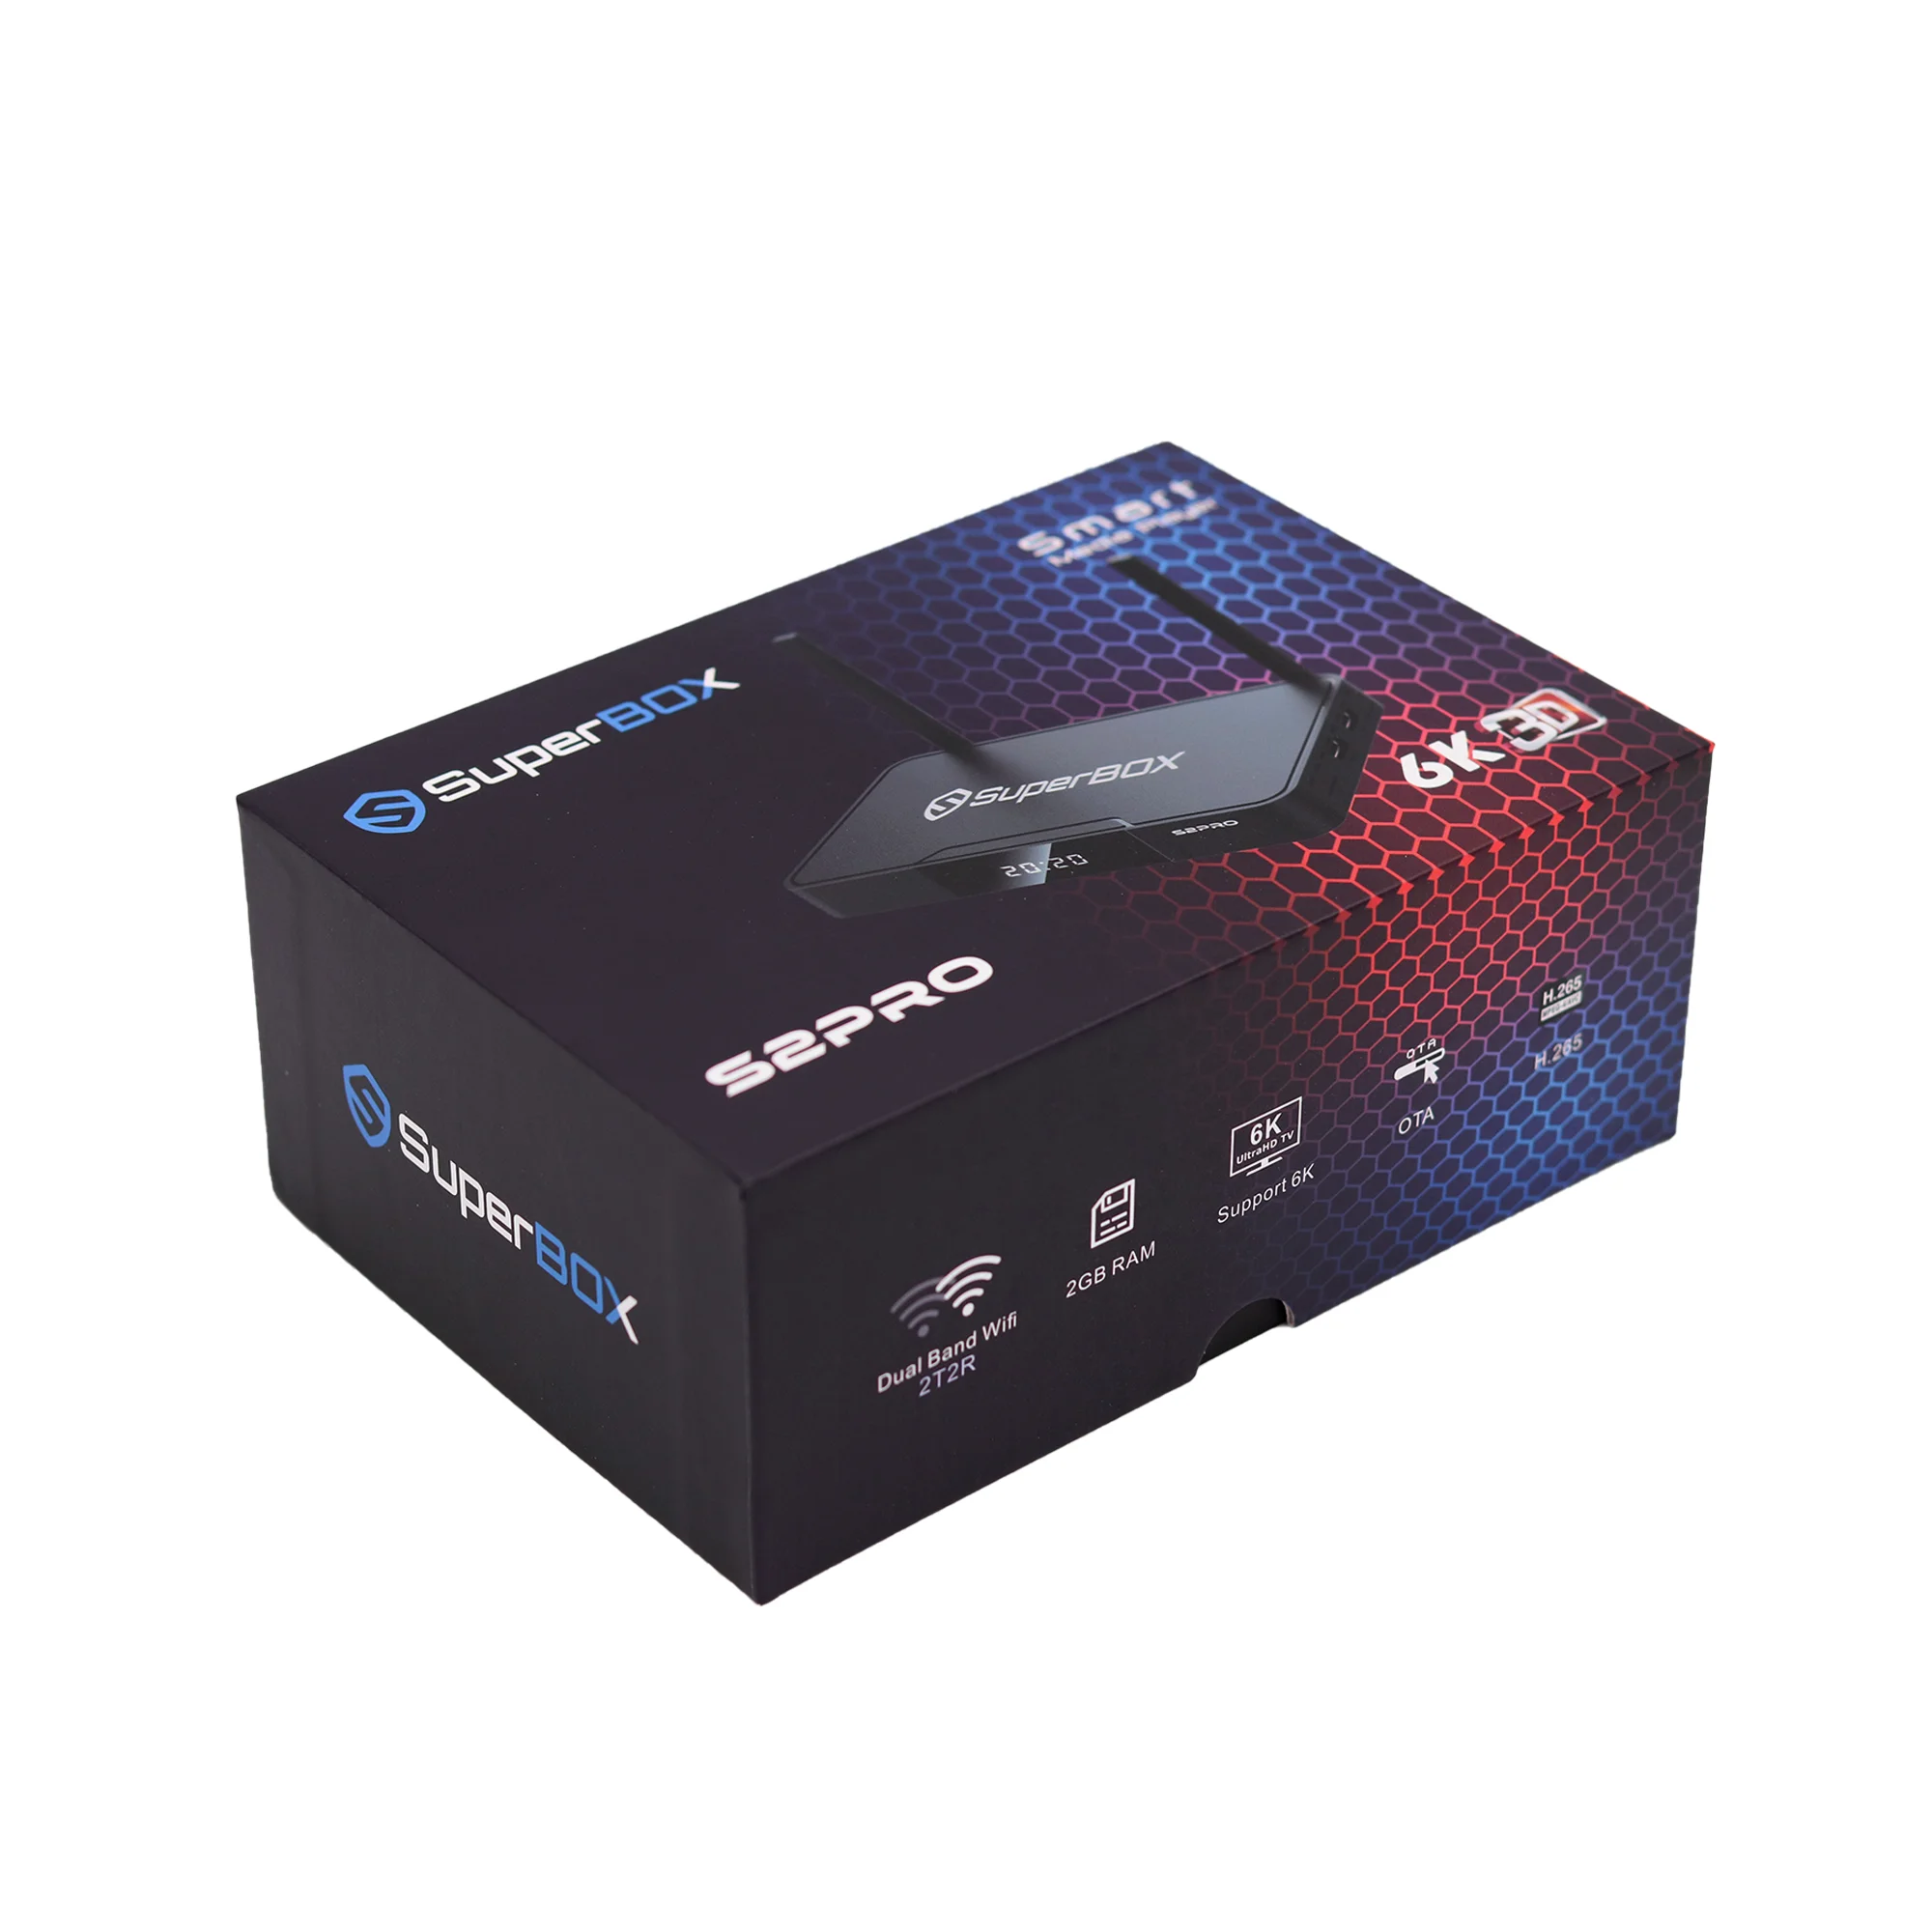 

Excellent quality low price SuperBox S2pro Mali-720MP2 GPU Free shipping from US with 7 days play back